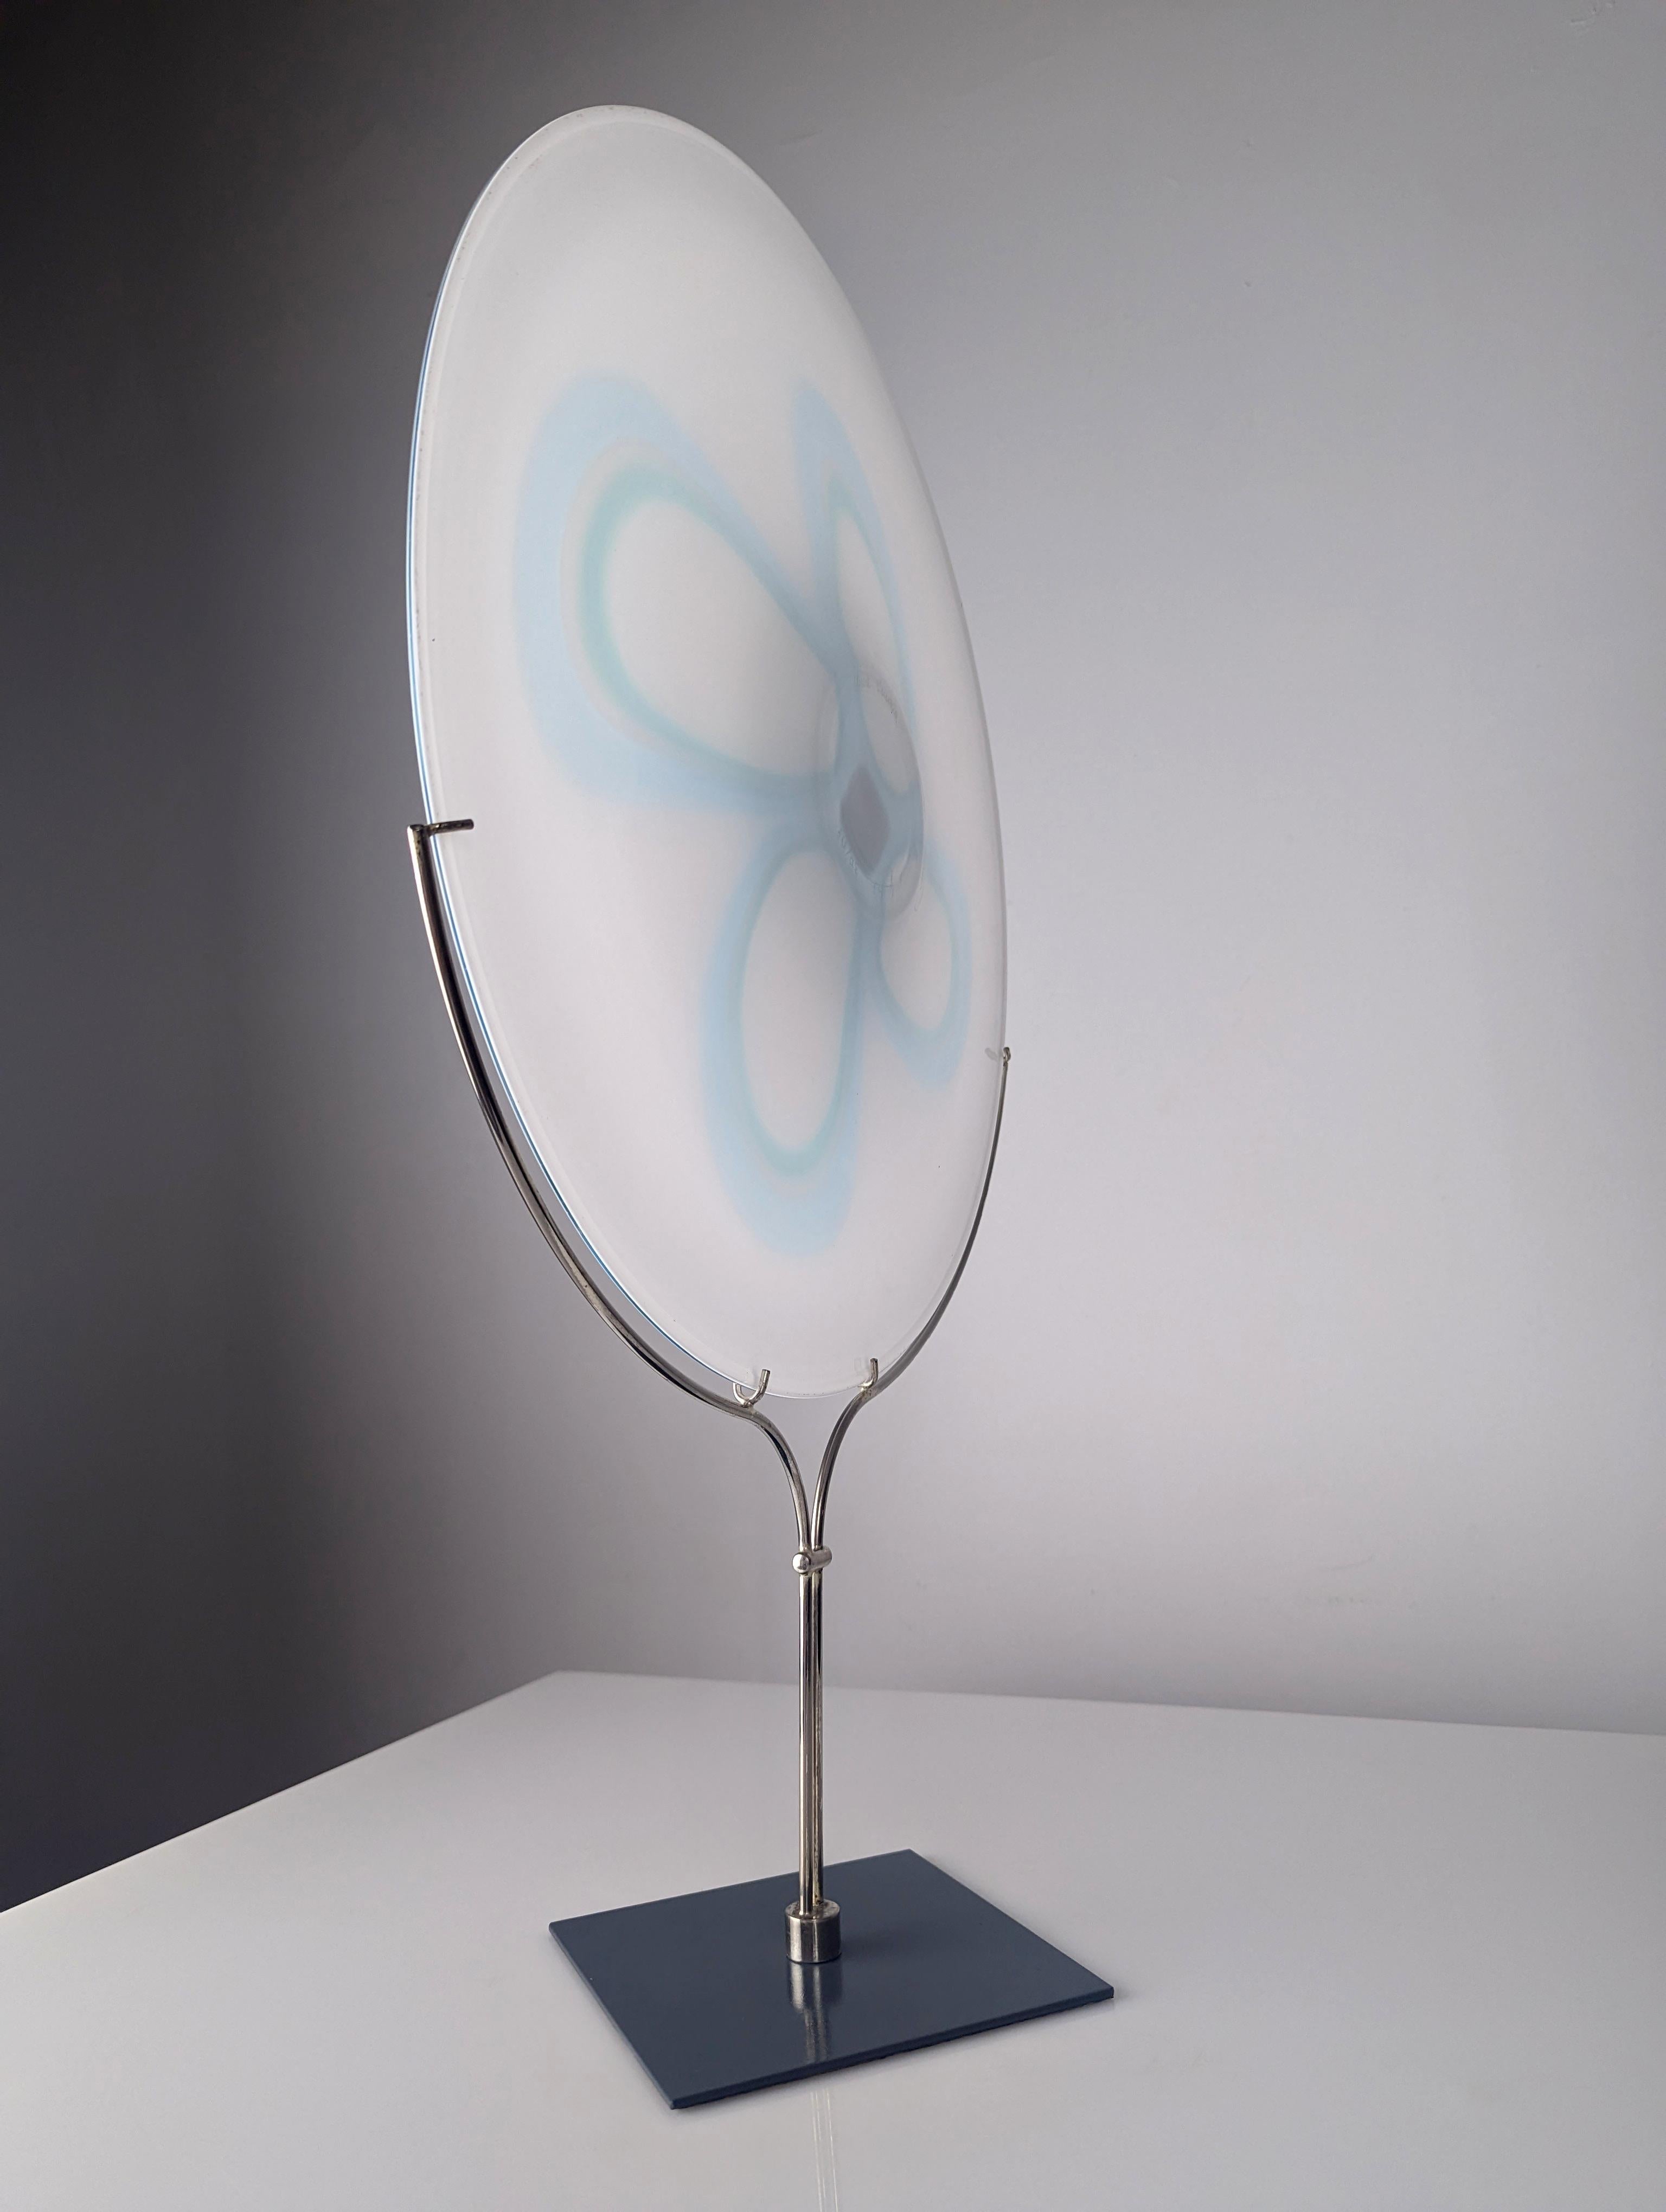 Metal Tondo Glass Sculpture by Bruno Gambone for VeArt 1970s For Sale